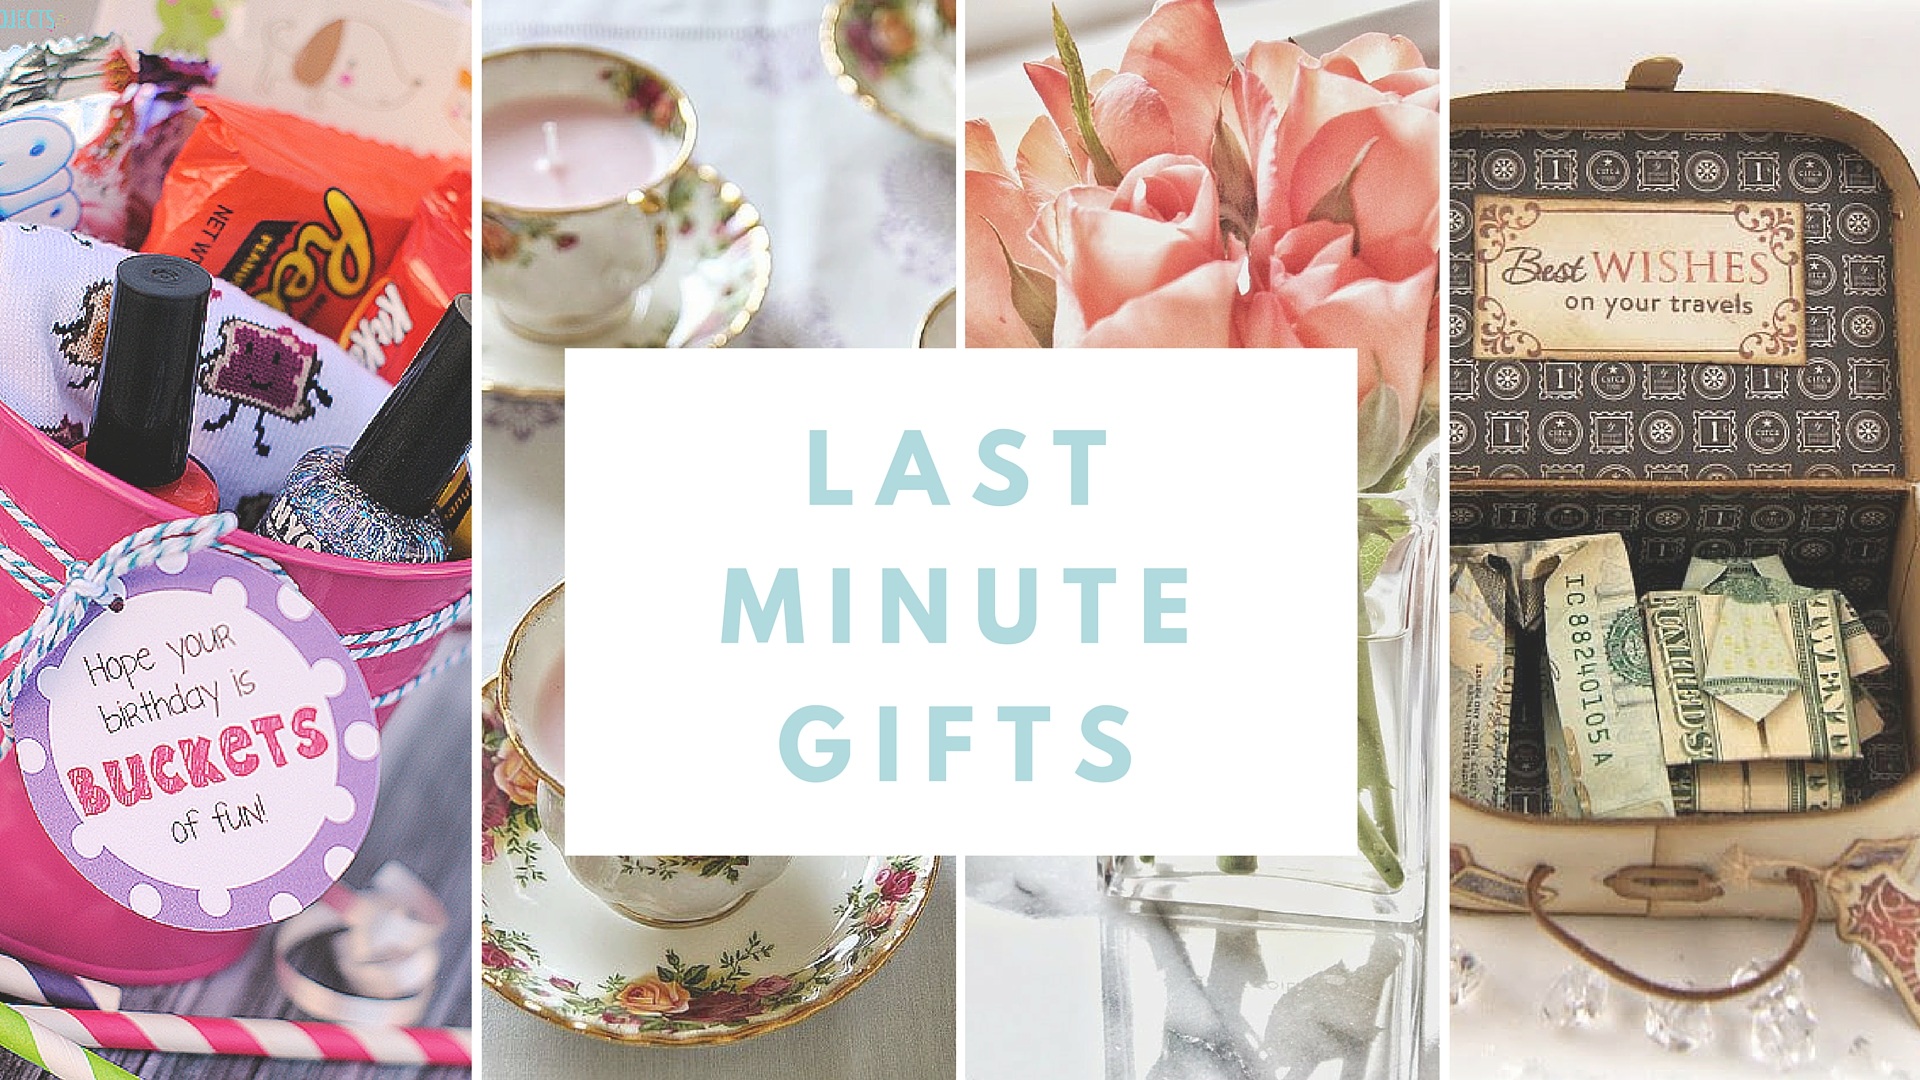 How To Make Inexpensive And Fashionable Last-Minute Gifts